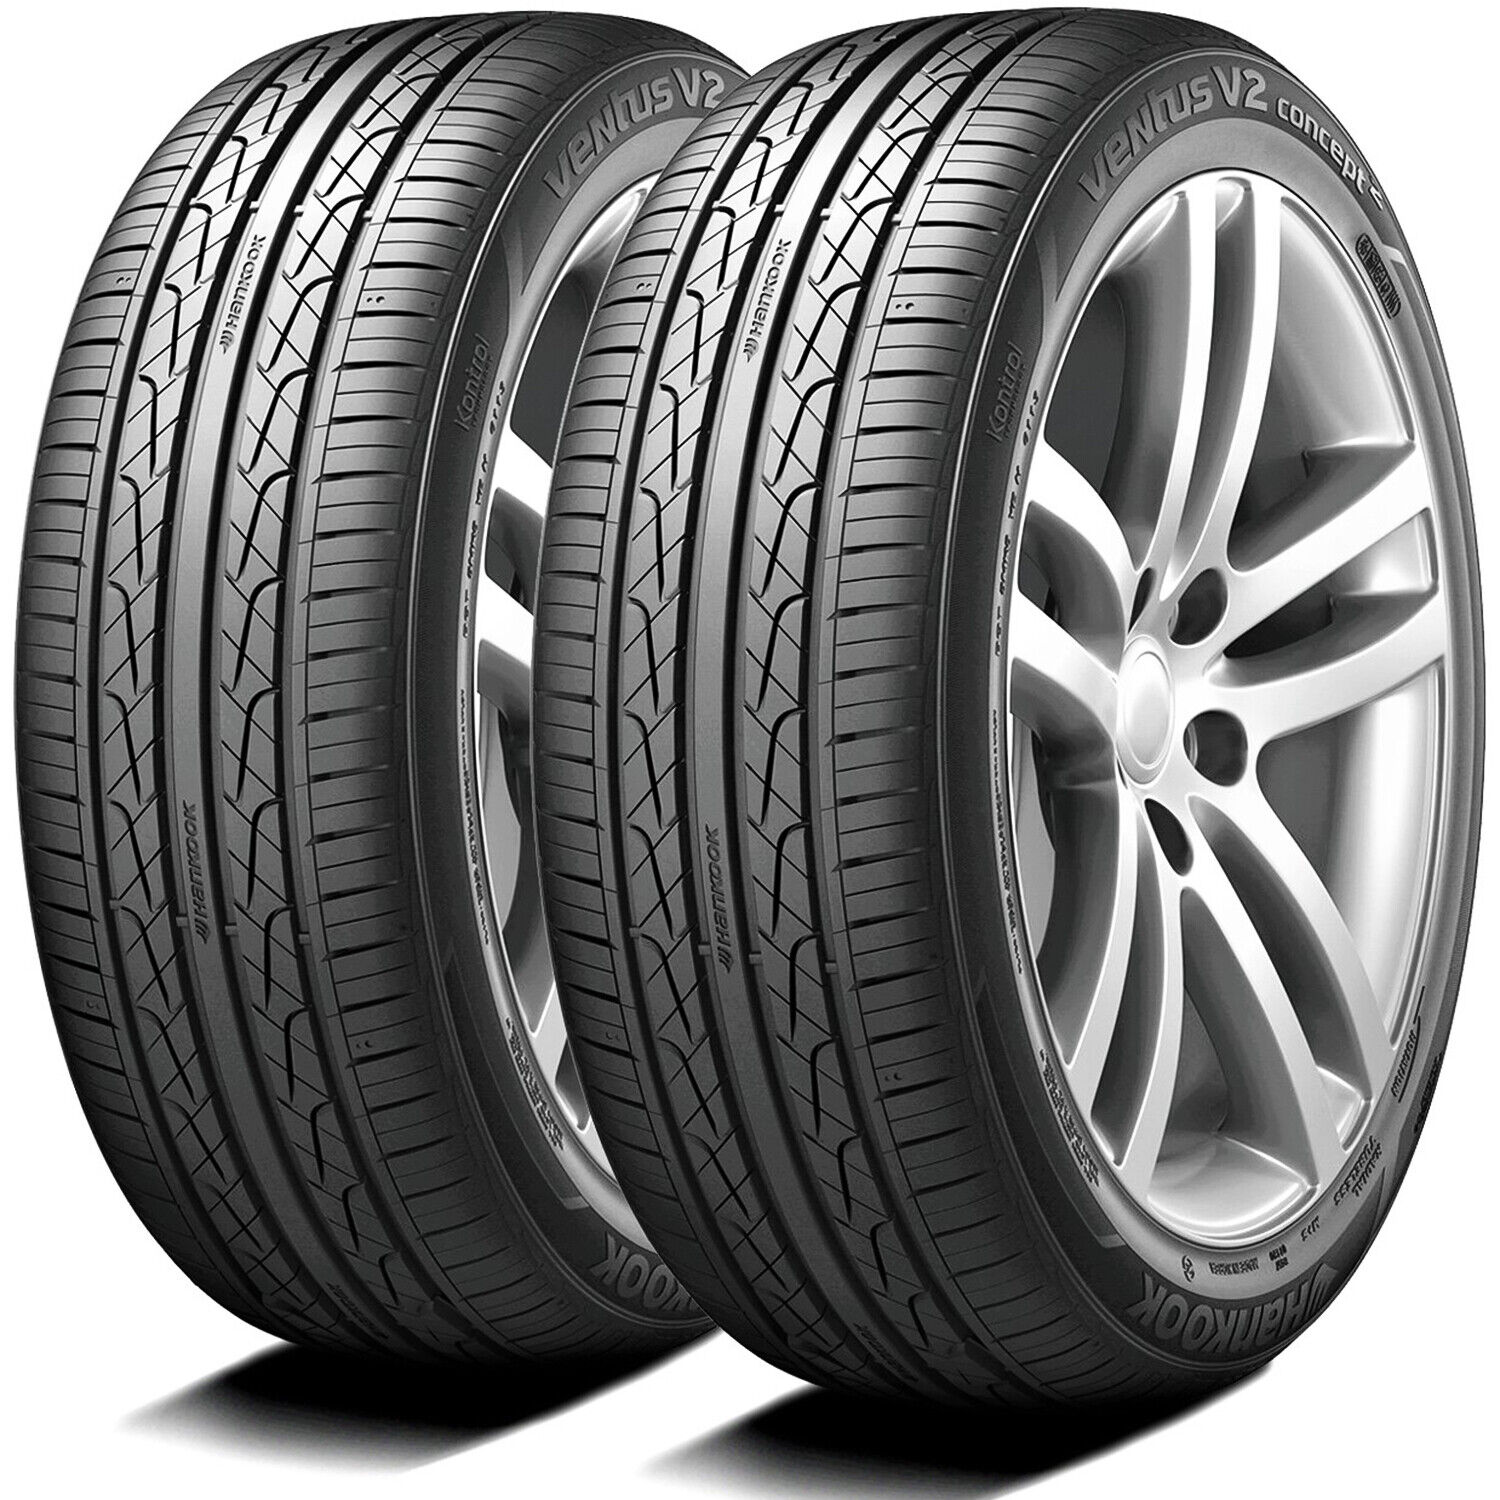 2 Tires Hankook Ventus V2 Concept2 255/35R18 94W XL AS A/S High Performance